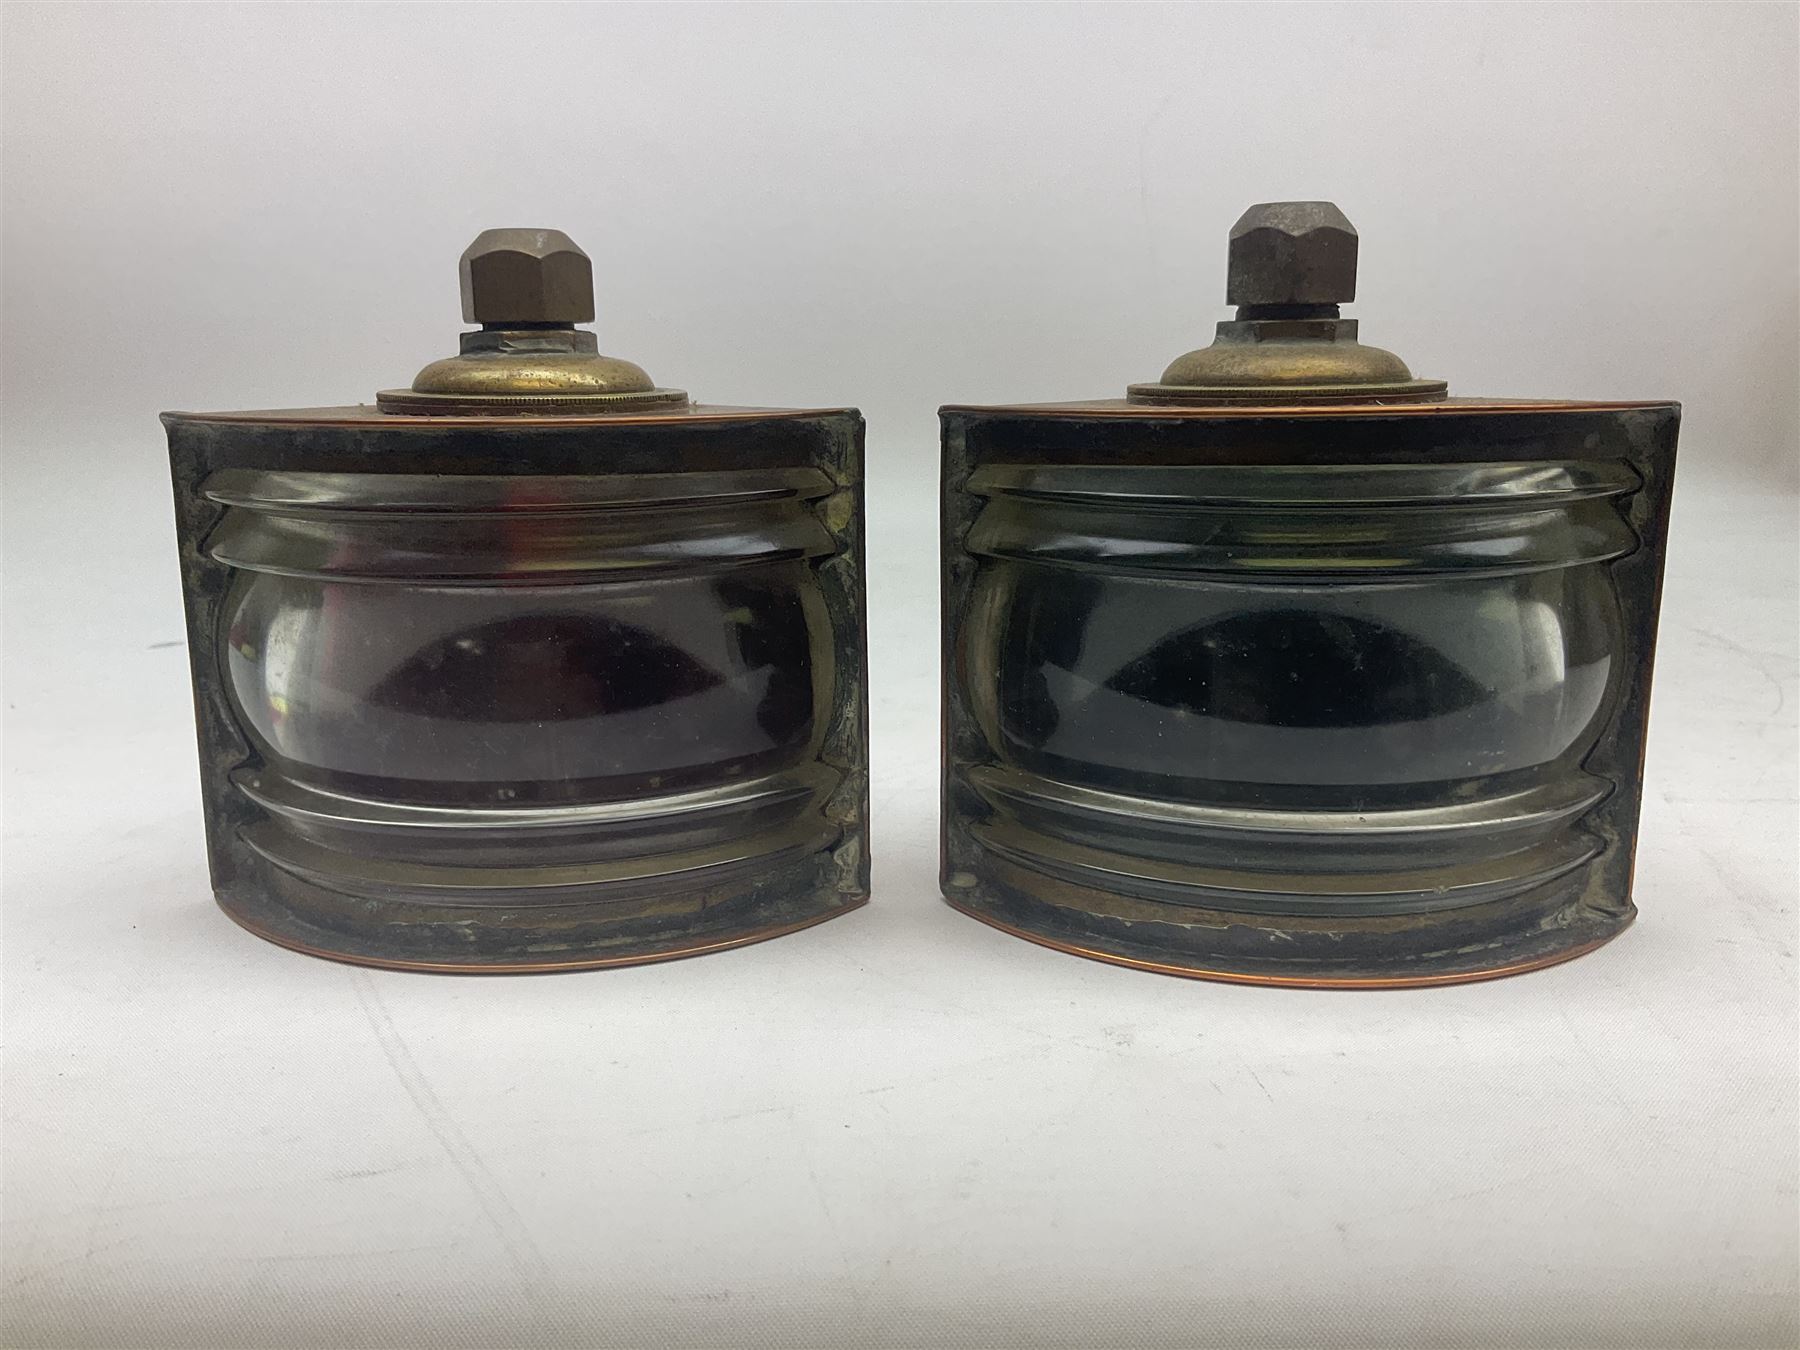 Pair of 'Starboard' and 'Port' copper ship lamps of bow-fronted triangular form by Simpson Lawrence - Image 7 of 9